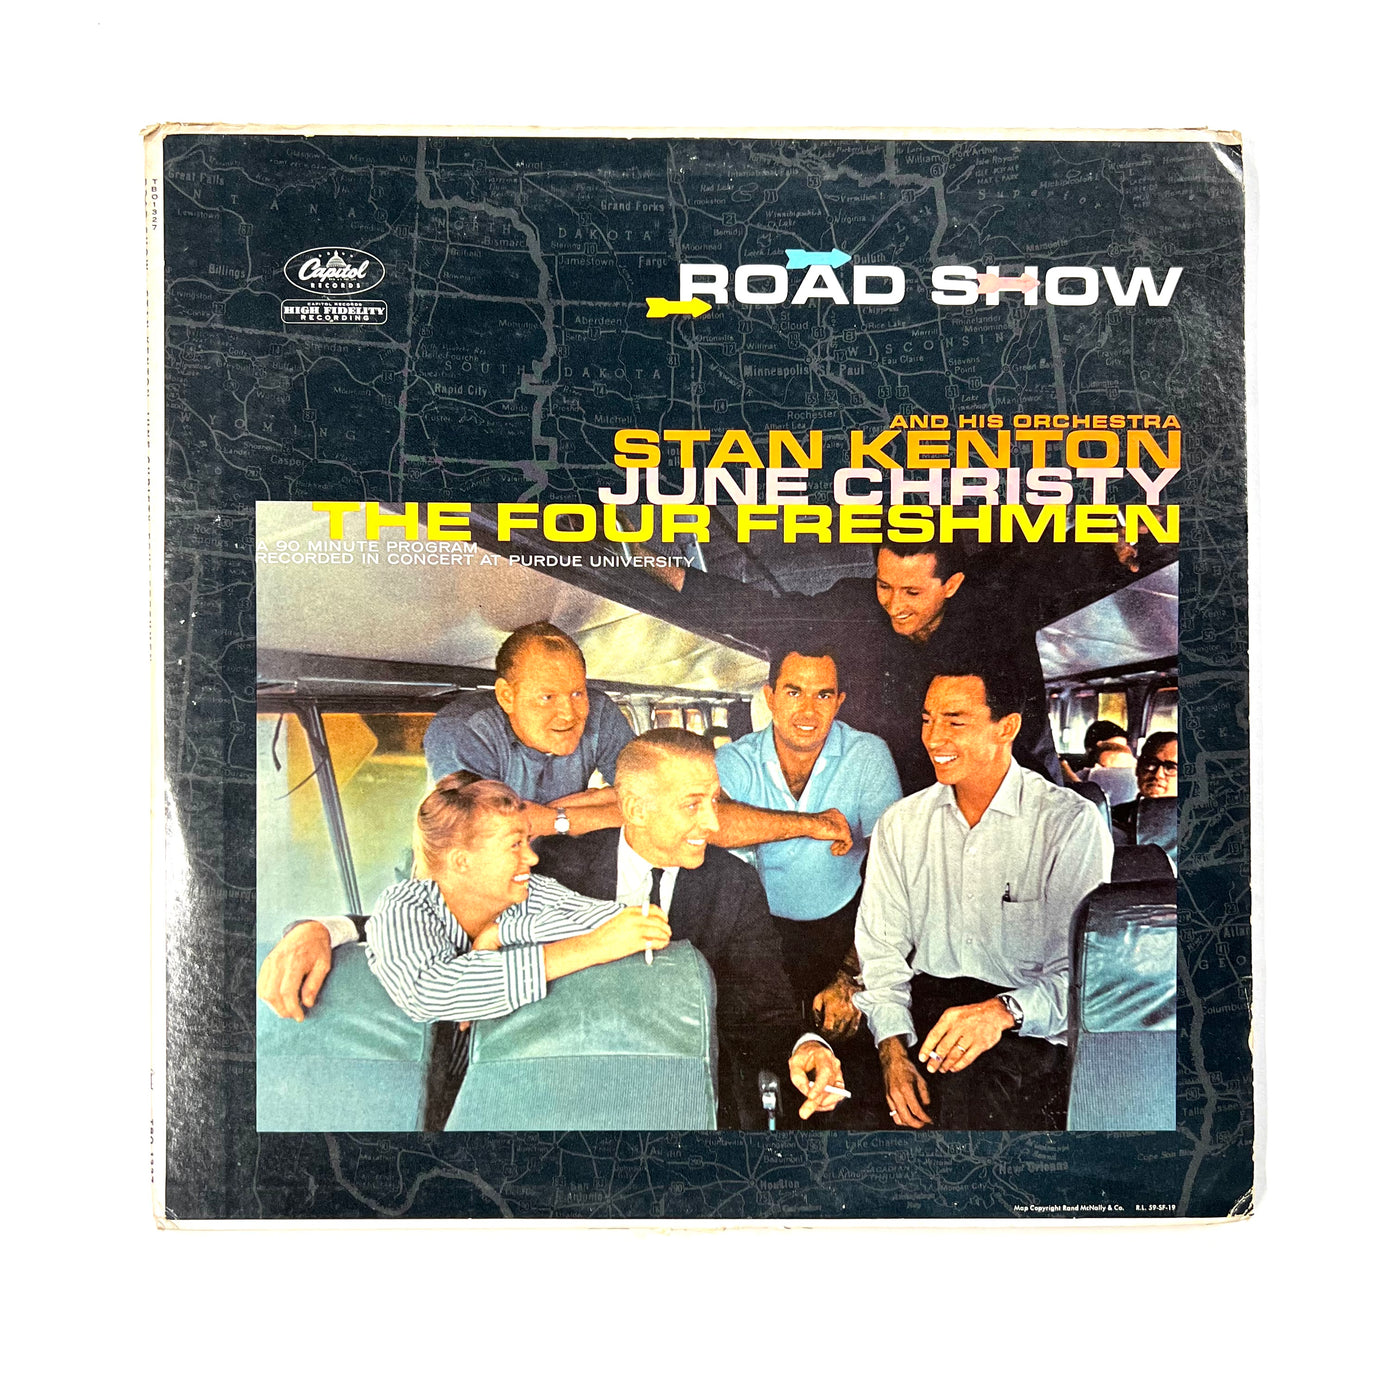 Stan Kenton And His Orchestra, June Christy, The Four Freshmen - Road Show